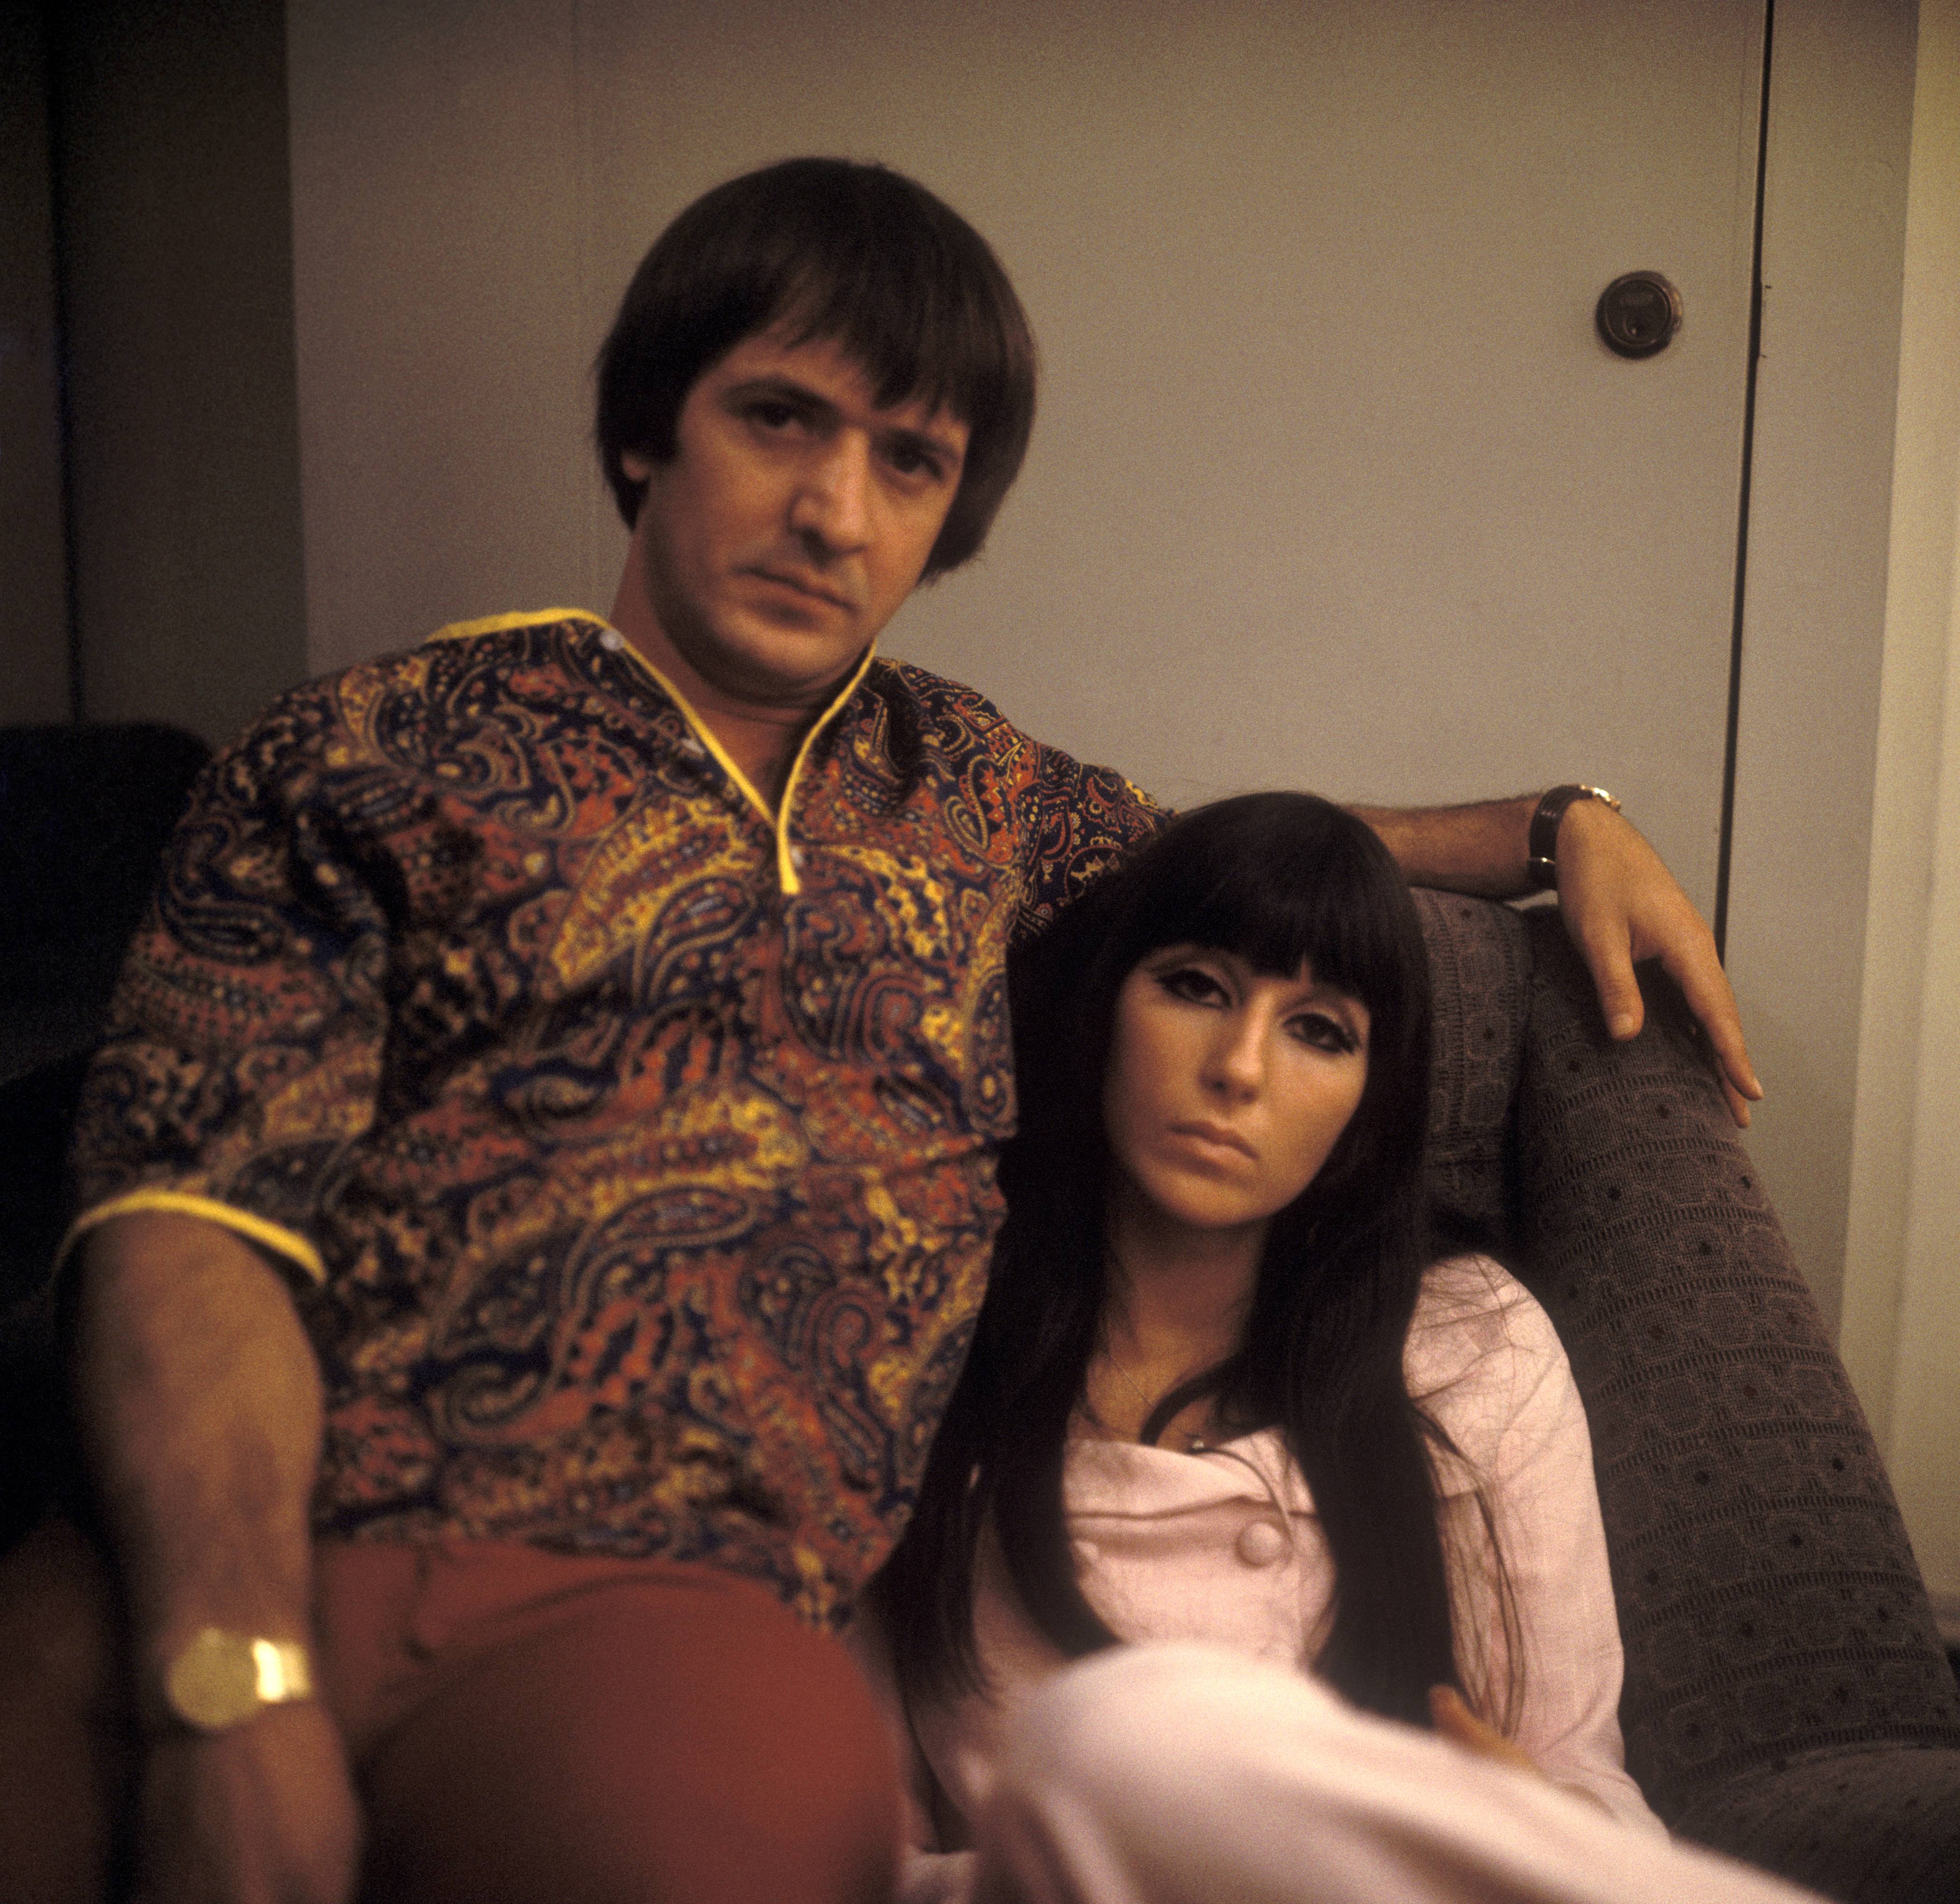 Singers Sonny Bono and Cher in the UK circa 1960 |  Source: Getty Images